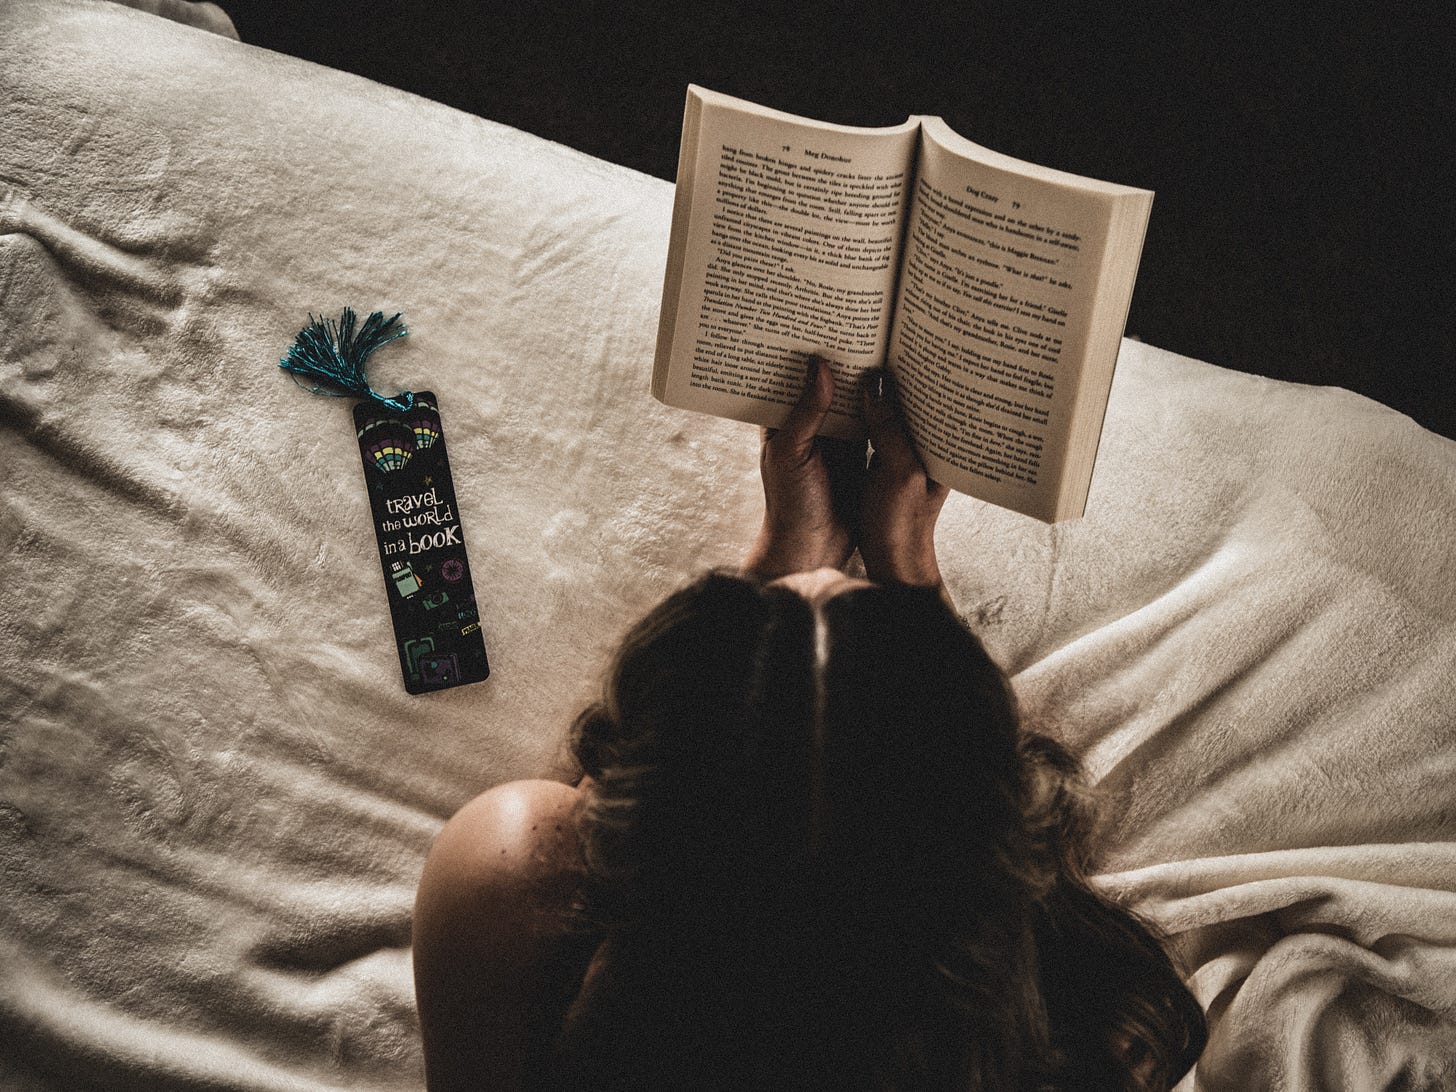 Woman reading a book. Photo by Edgar Colomba from Pexels